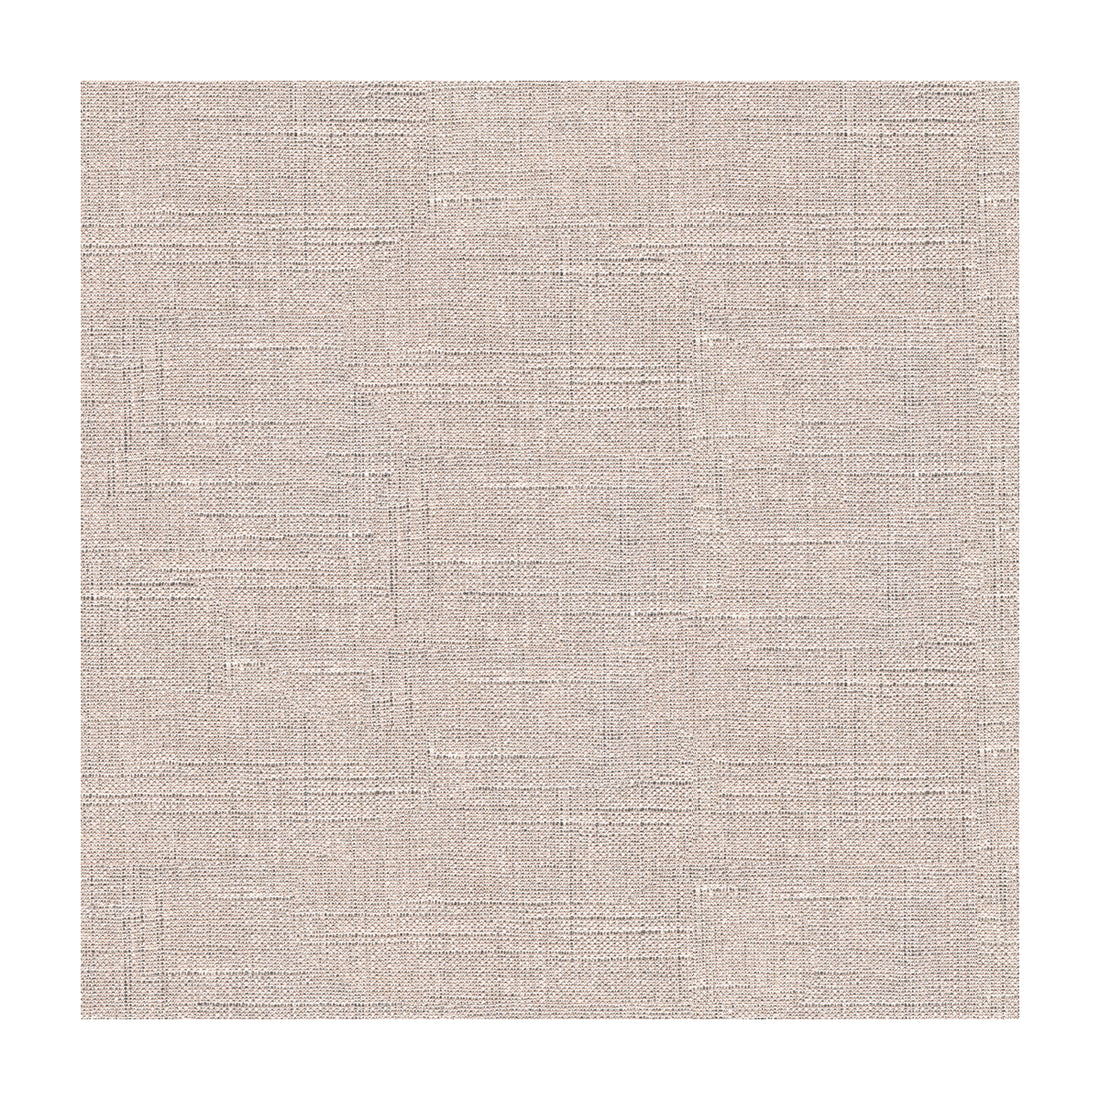 Kravet Basics fabric in 33838-117 color - pattern 33838.117.0 - by Kravet Basics in the Perfect Plains collection